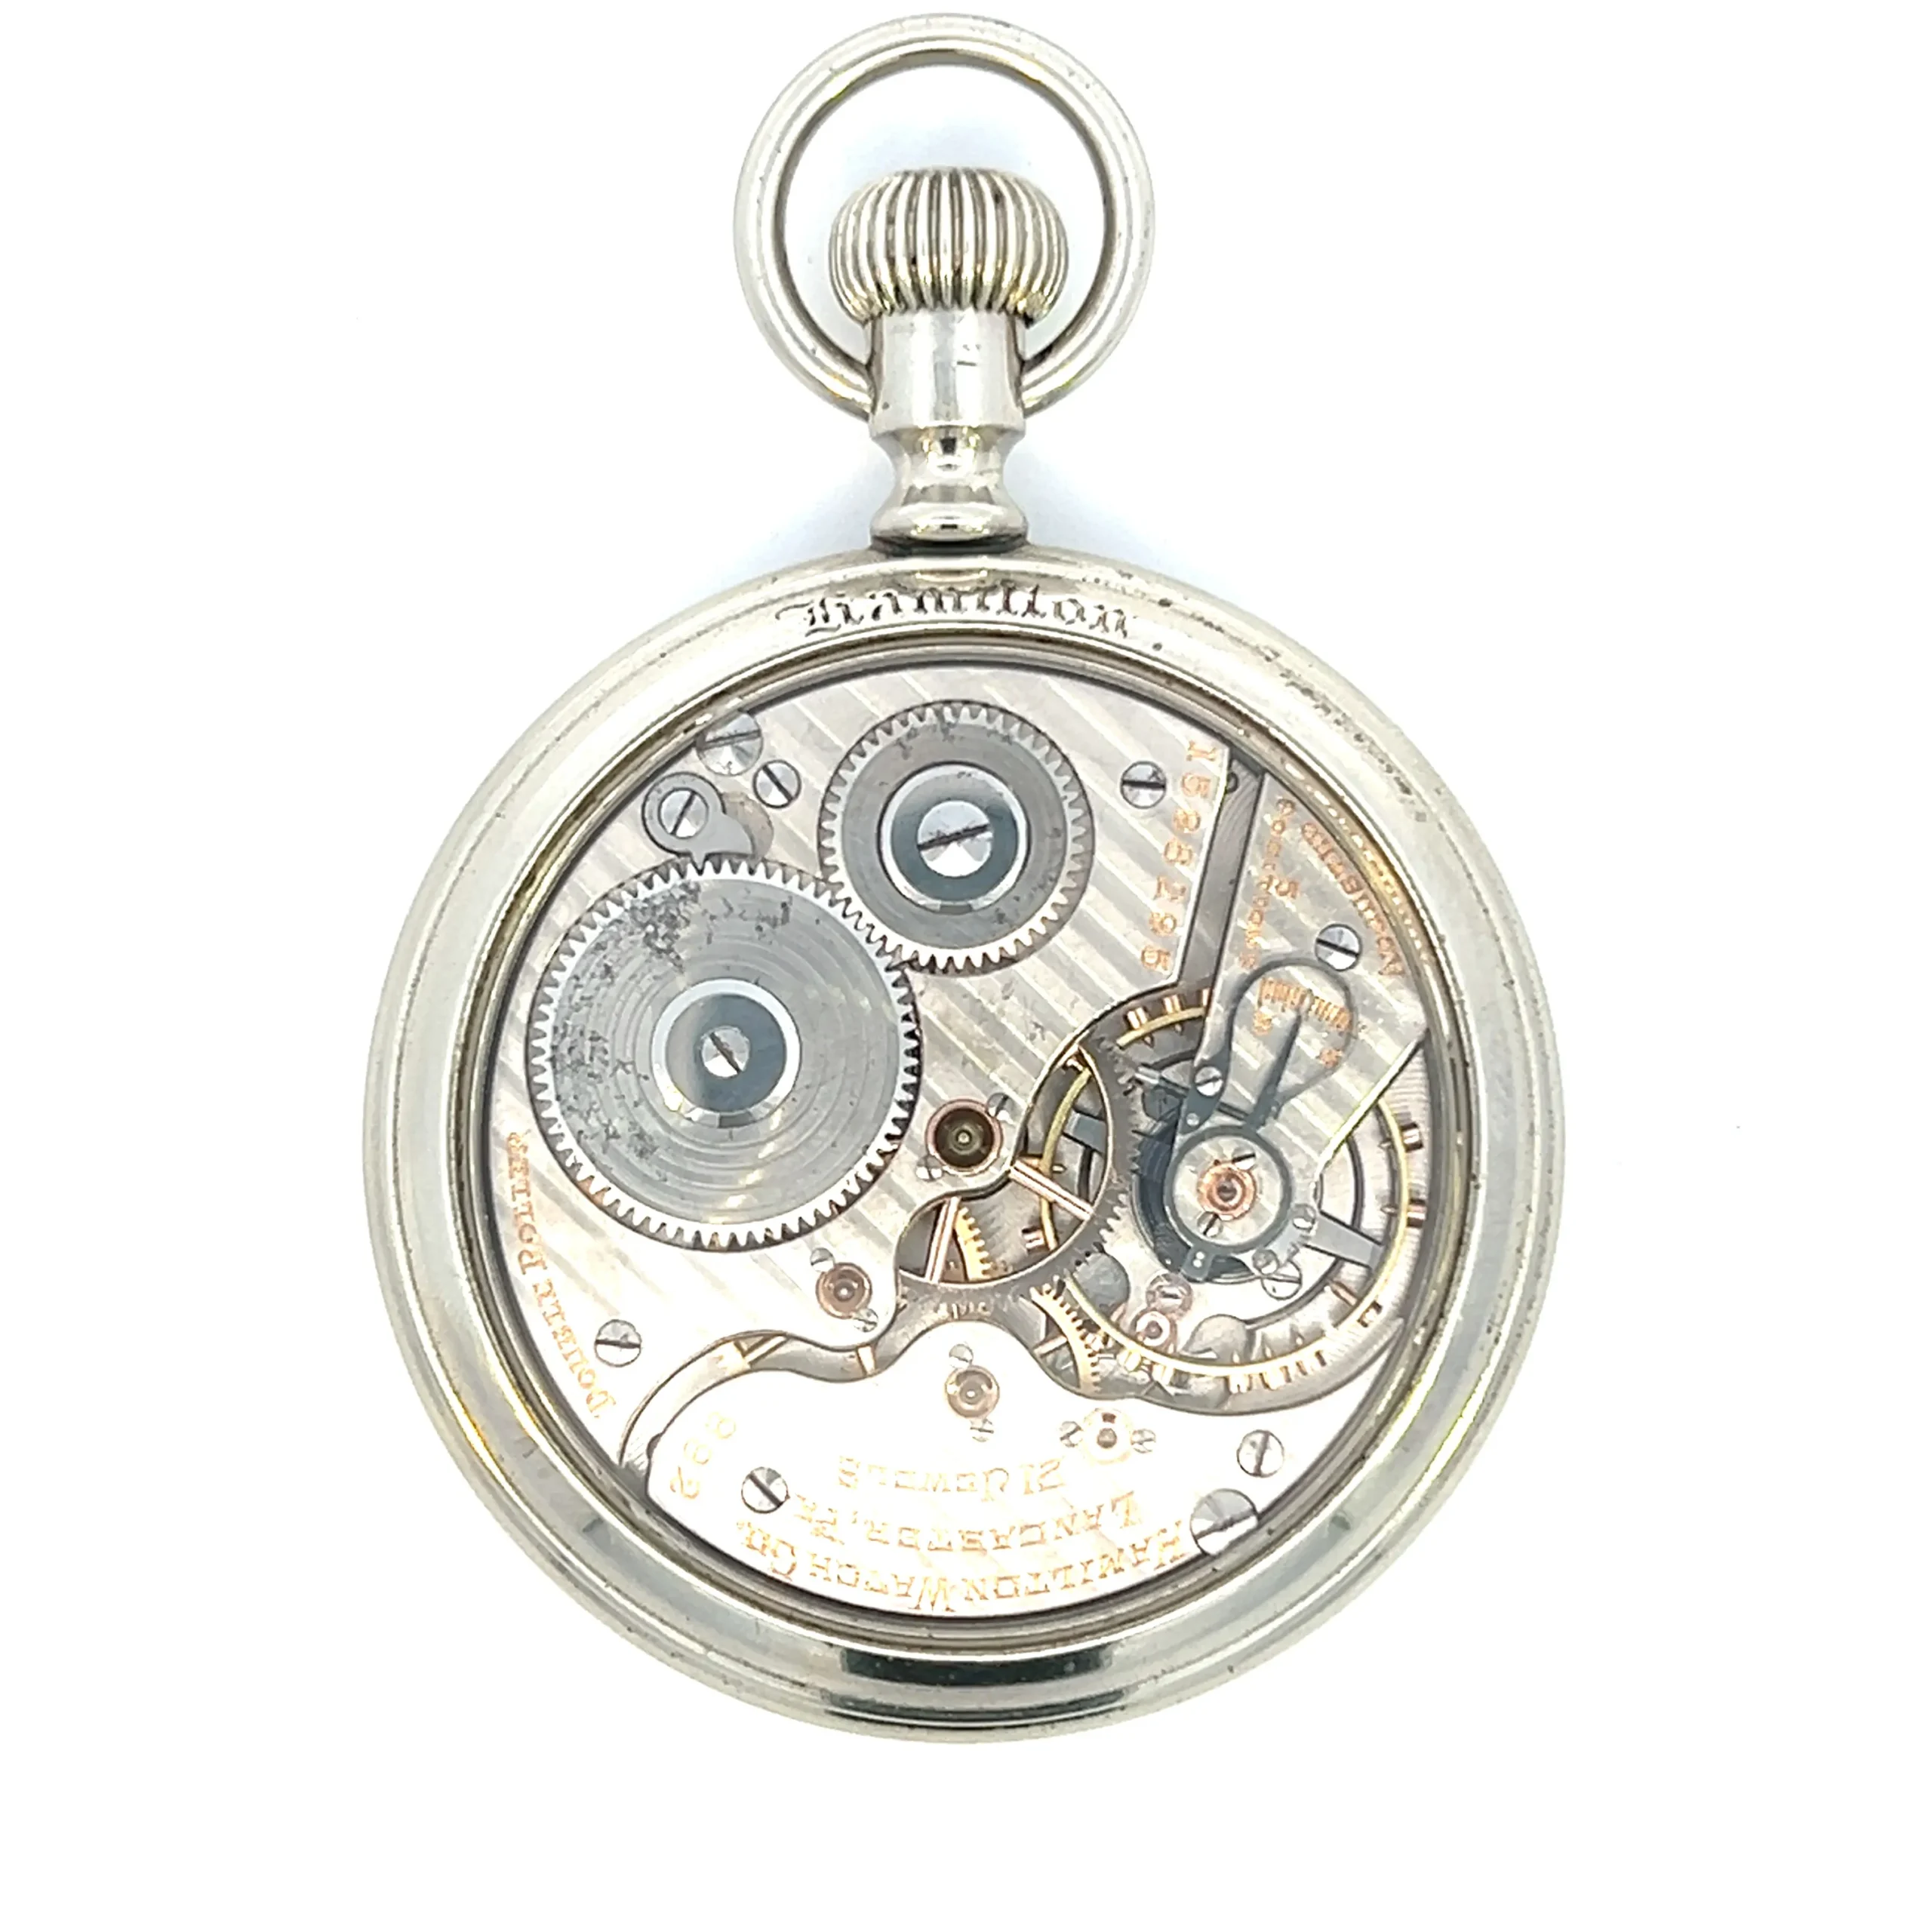 One estate antique nickel Hamilton Railway Special Pocket Watch with an open-face design, white dial, black Arabic numerals, and open back.